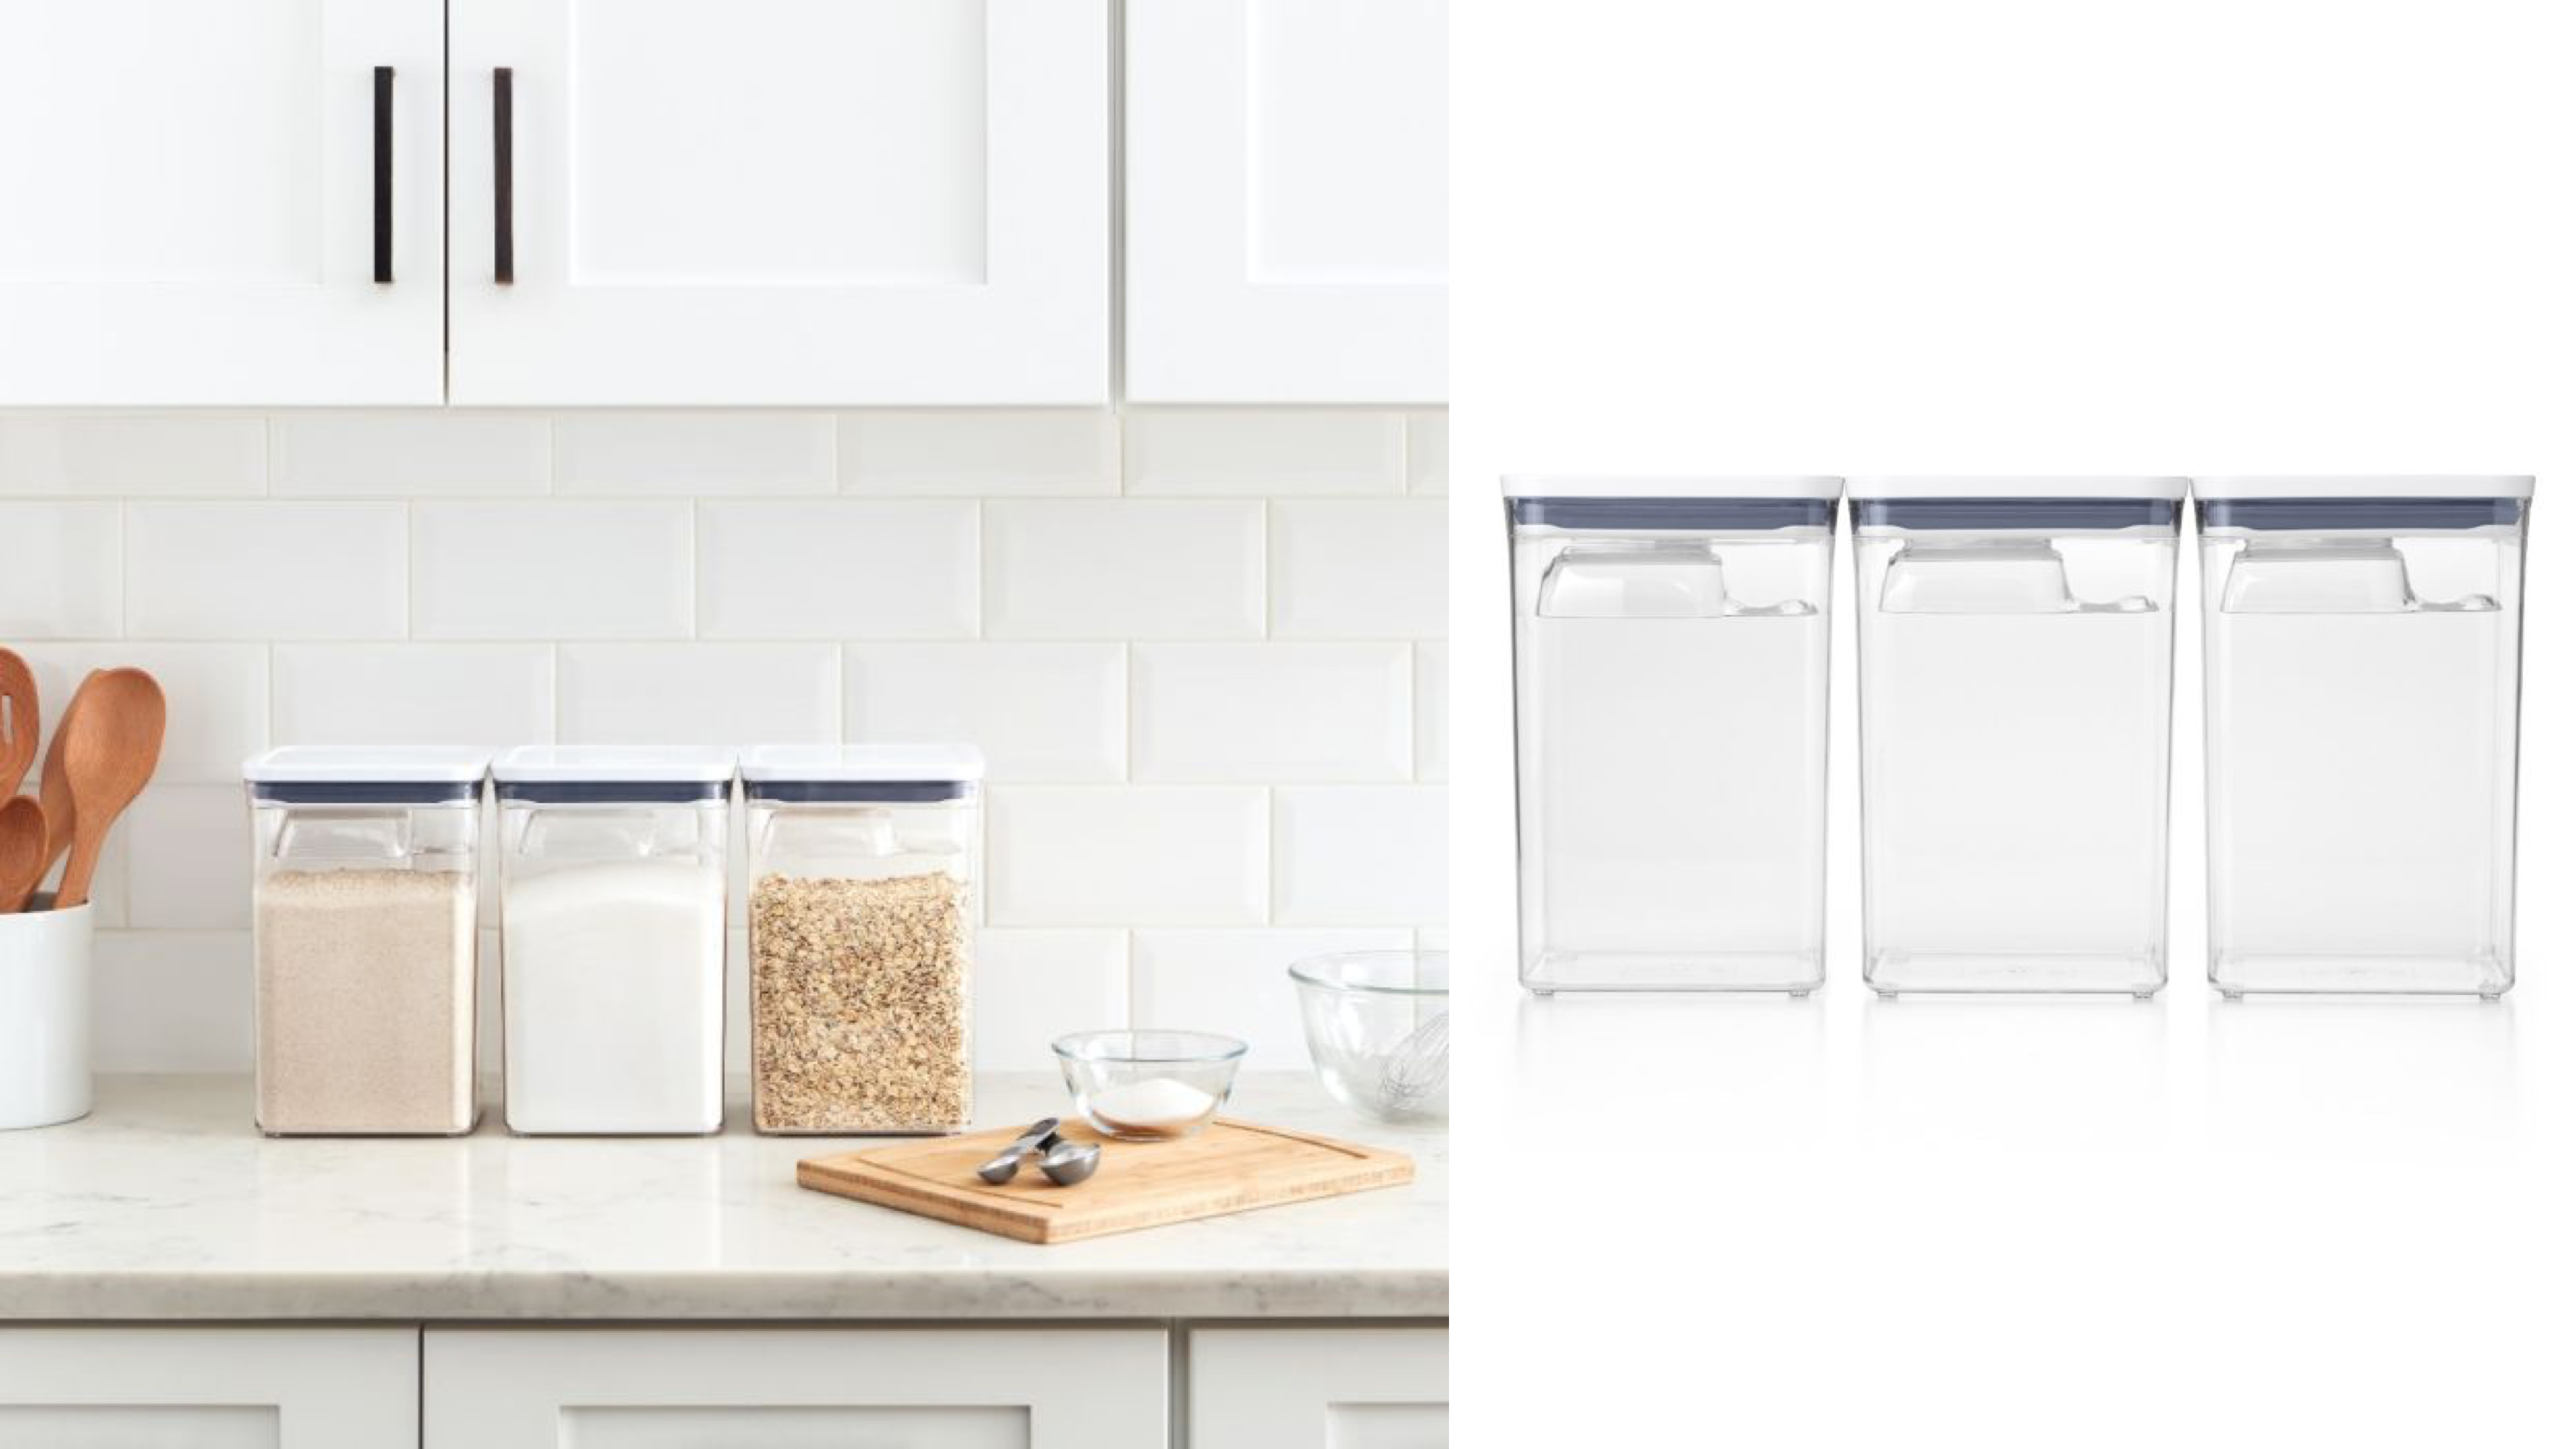 airtight storage containers for foods like grains, cereal, rice, pasta, and flour